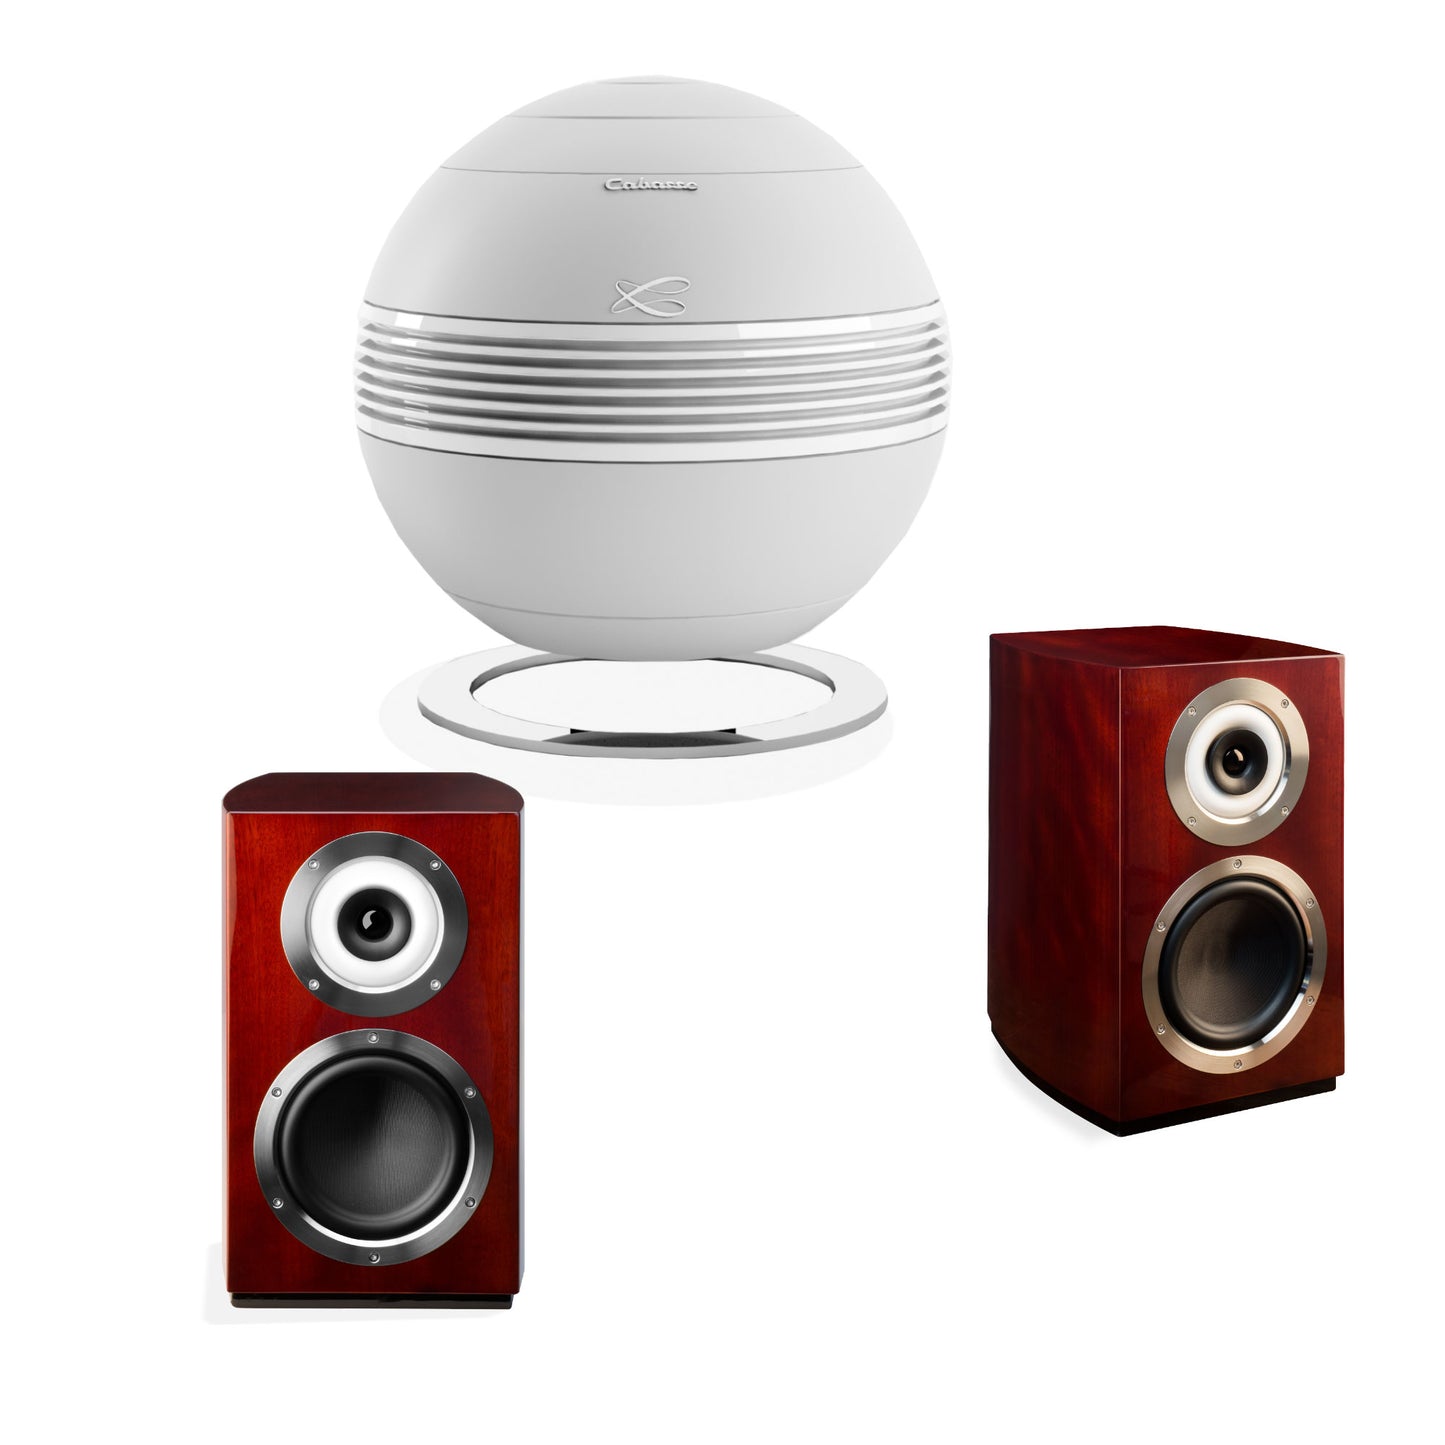 Cabasse Murano + Pearl Sub Bundle - Mahogany Speakers with White Subwoofer